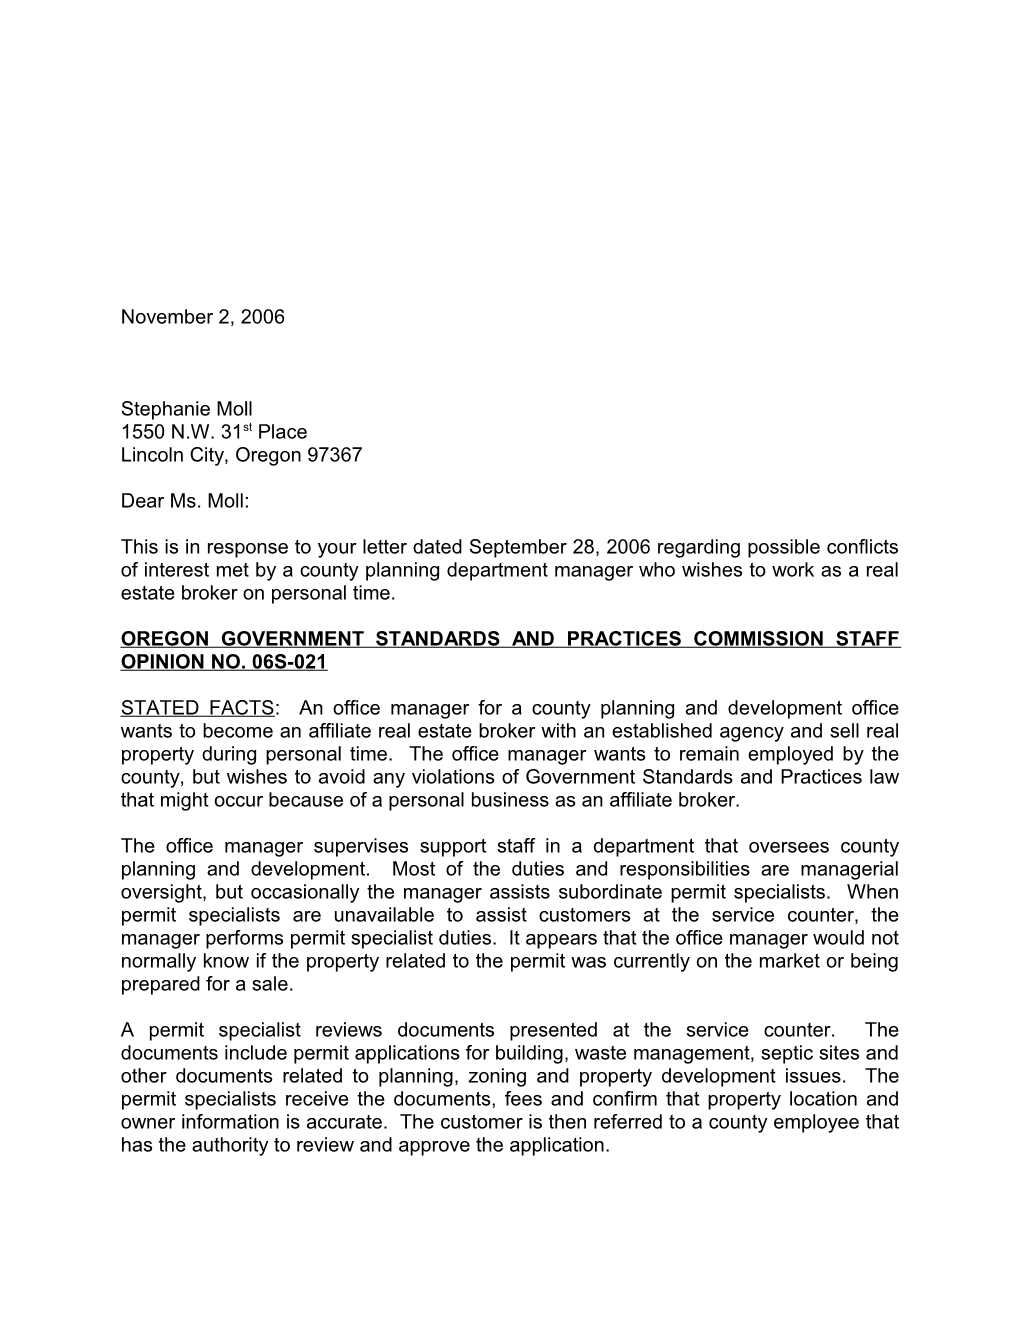 Oregon Government Standards and Practices Commission Staff Opinion No. 06S-021